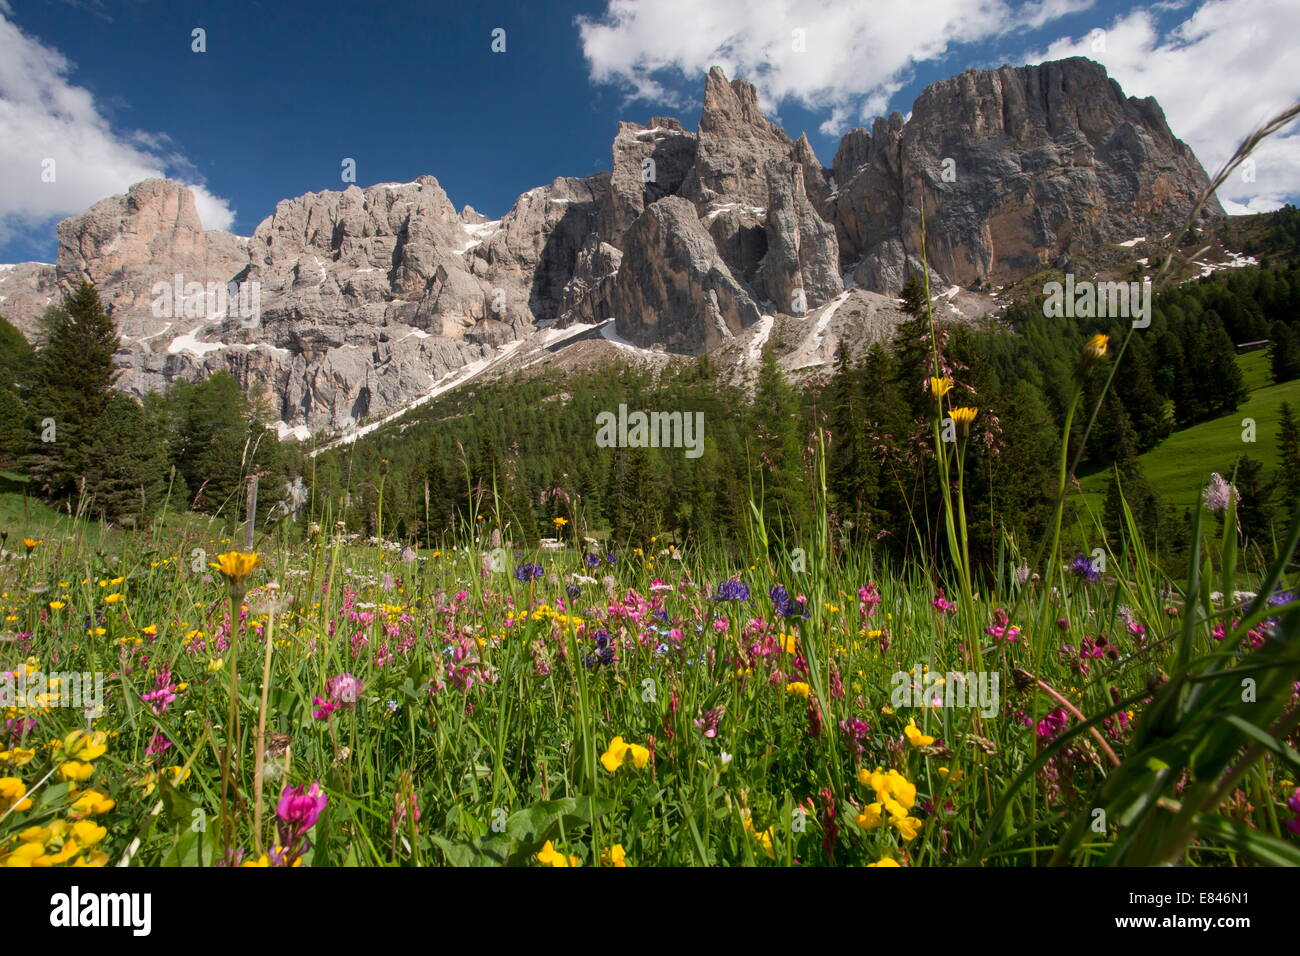 Summer wildflower meadow with the Sella Group - Gruppo di Sella - beyond, Dolomites, Italy. Stock Photo